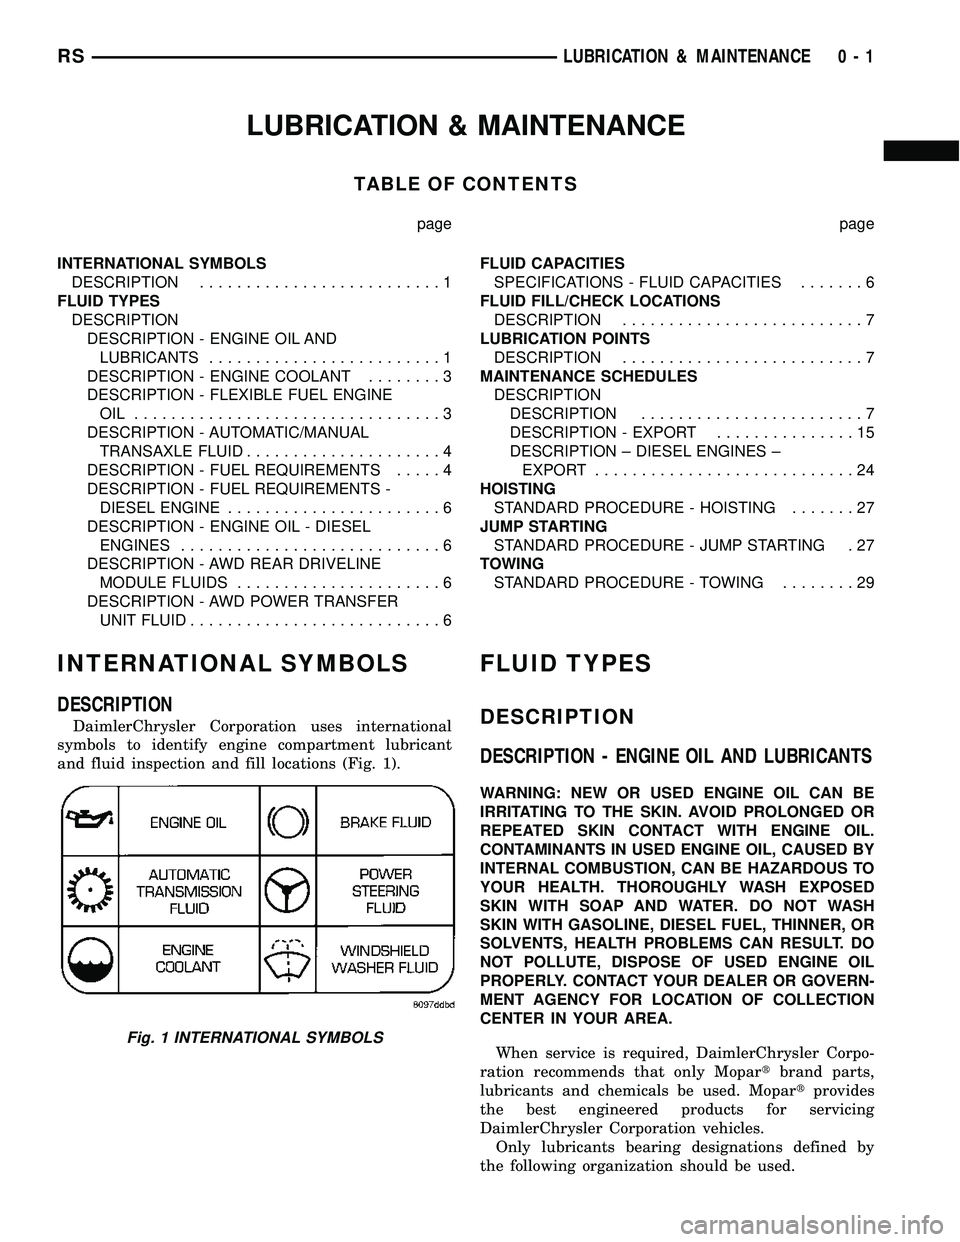 DODGE TOWN AND COUNTRY 2004  Service Manual LUBRICATION & MAINTENANCE
TABLE OF CONTENTS
page page
INTERNATIONAL SYMBOLS
DESCRIPTION..........................1
FLUID TYPES
DESCRIPTION
DESCRIPTION - ENGINE OIL AND
LUBRICANTS......................